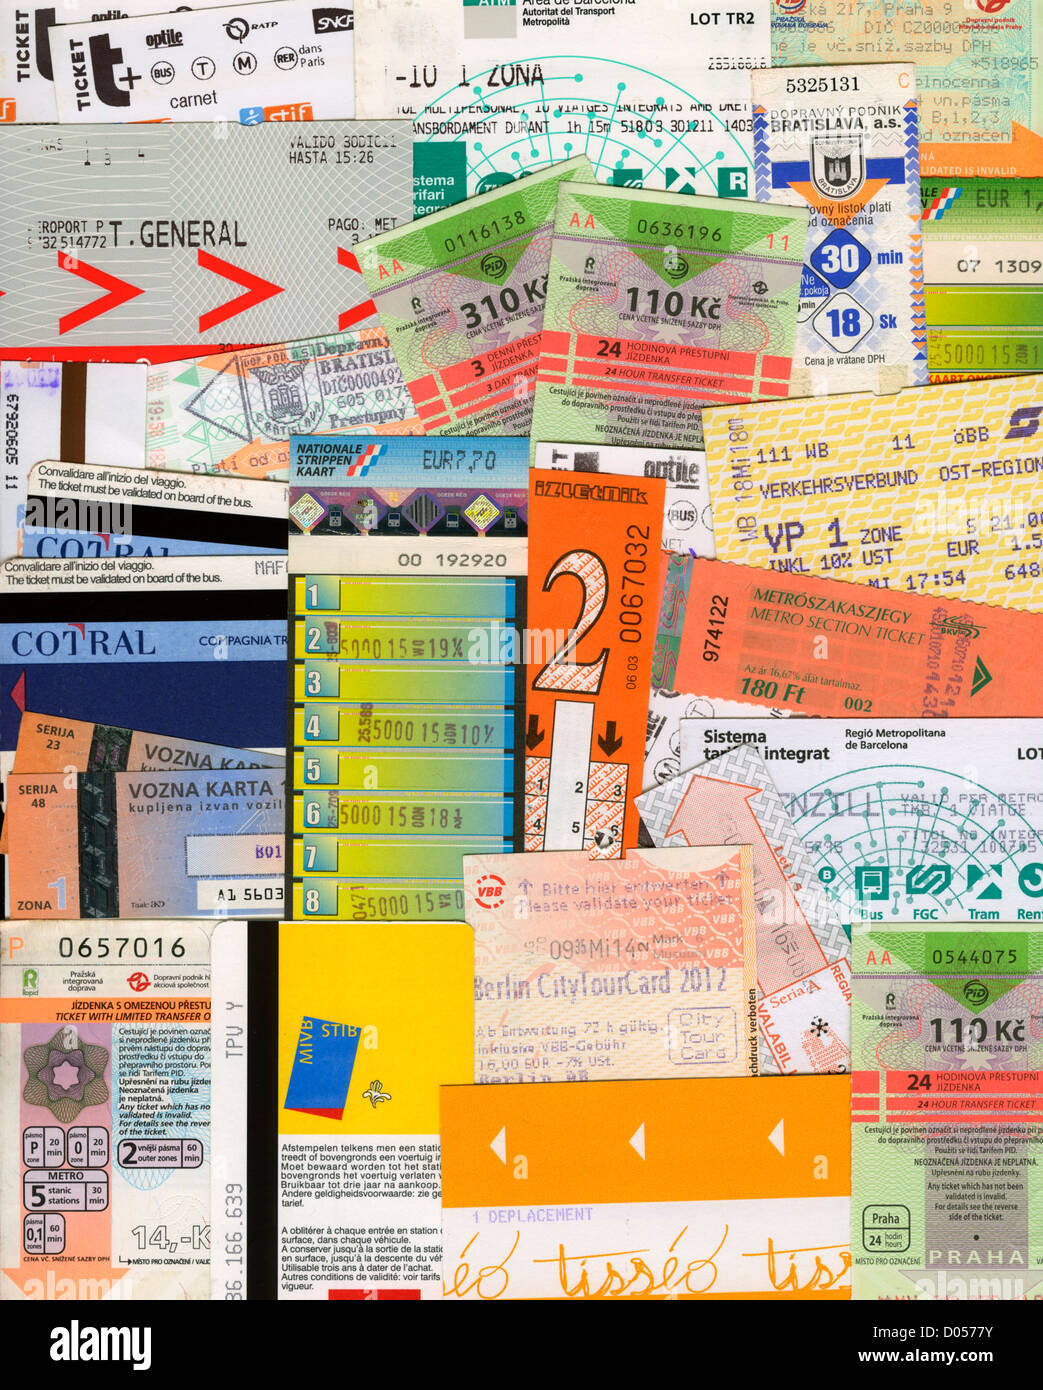 Public transport tickets from European cities (see 'description') Stock Photo